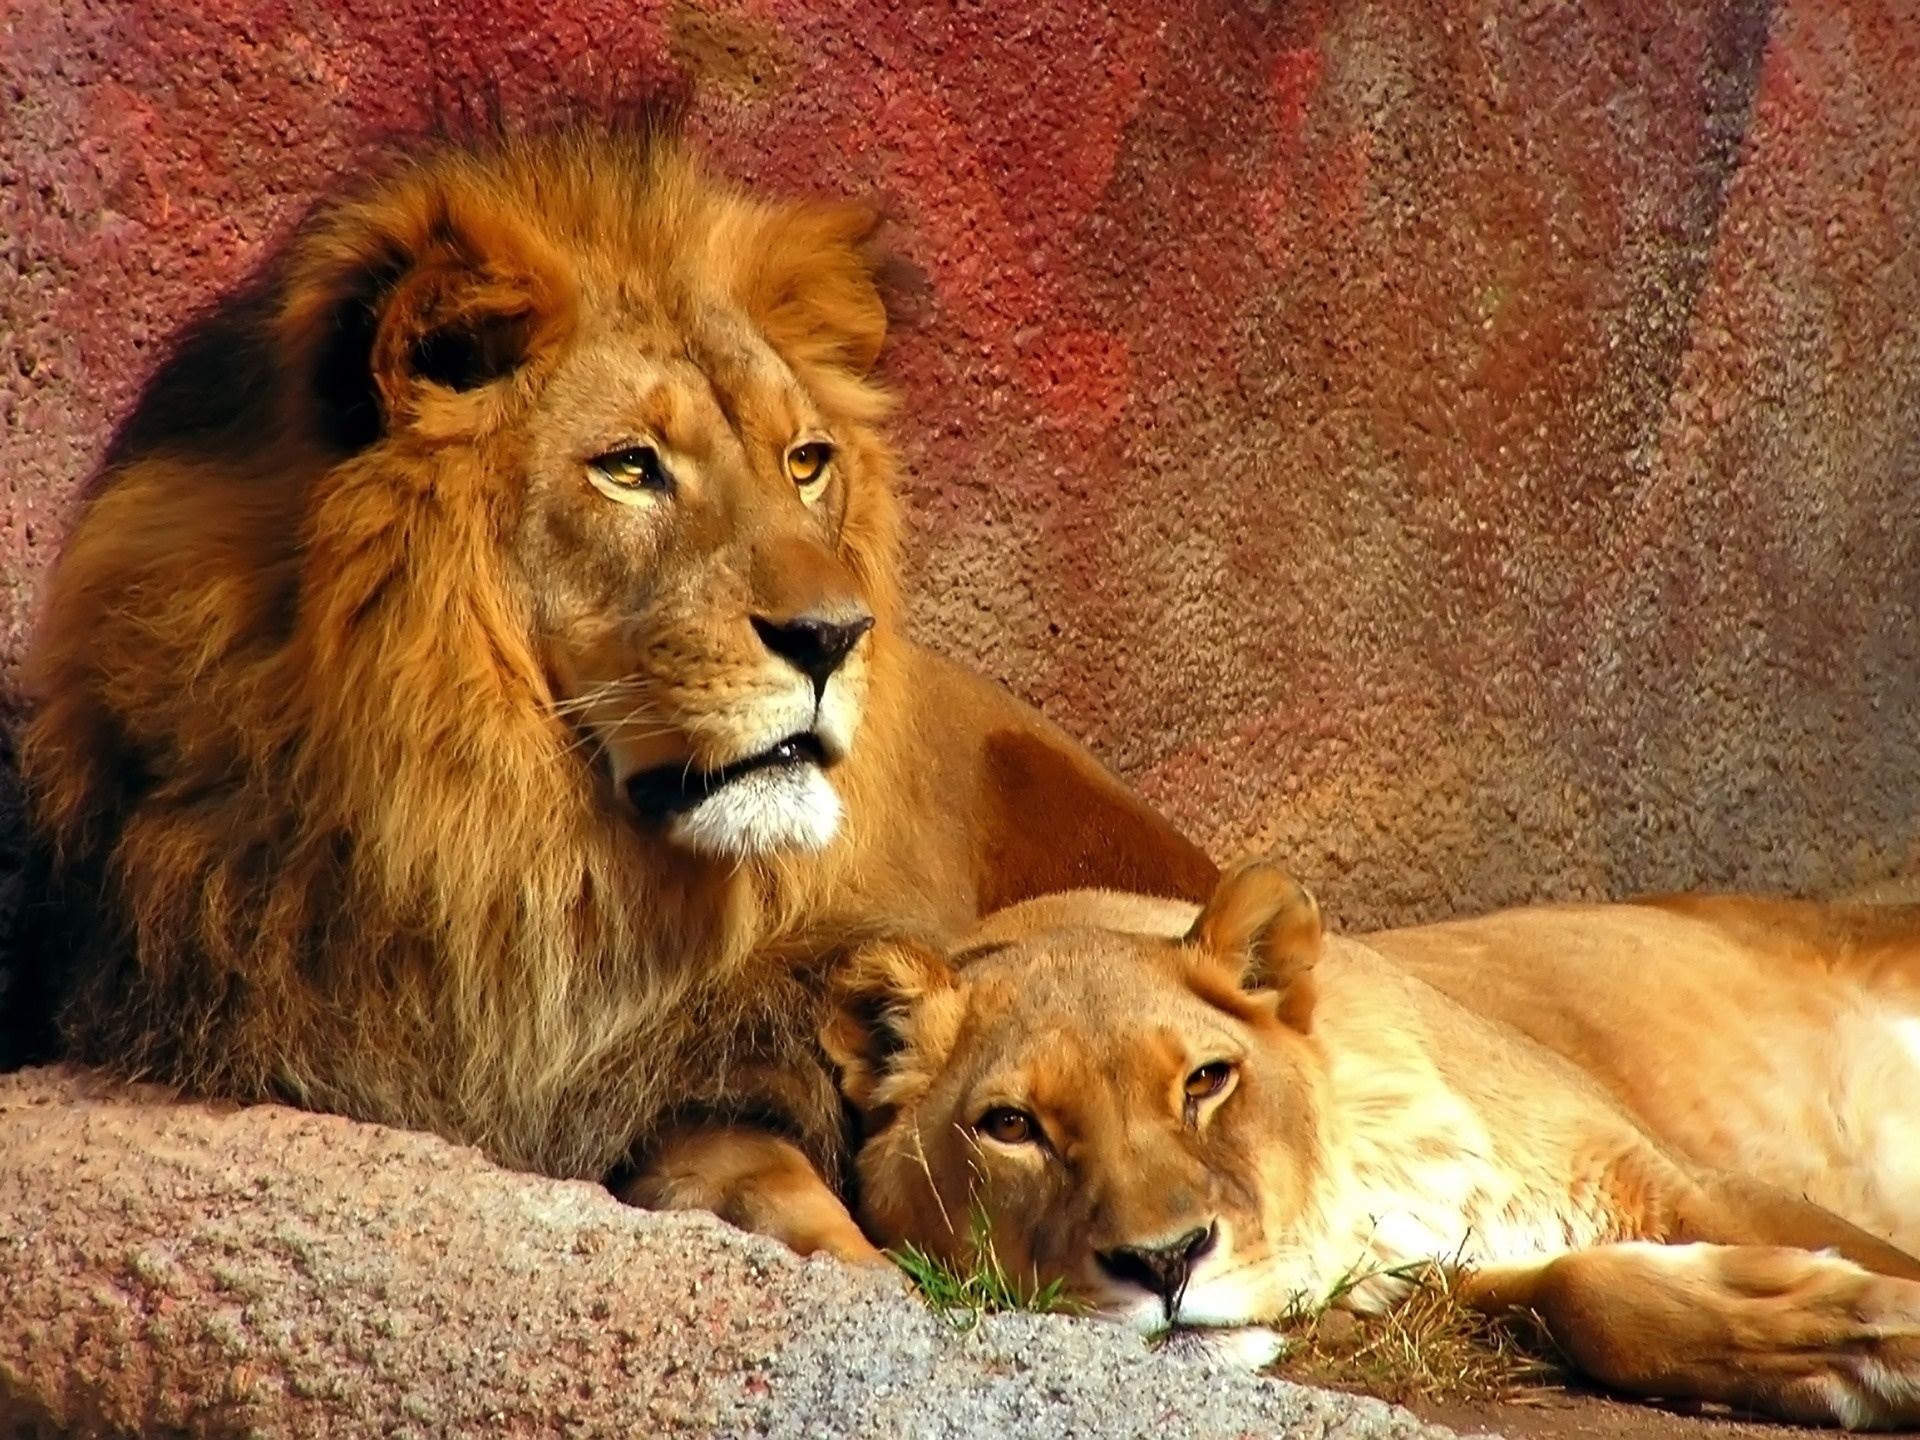 106807 download wallpaper couple, animals, pair, lion, predator, big cat, mane screensavers and pictures for free